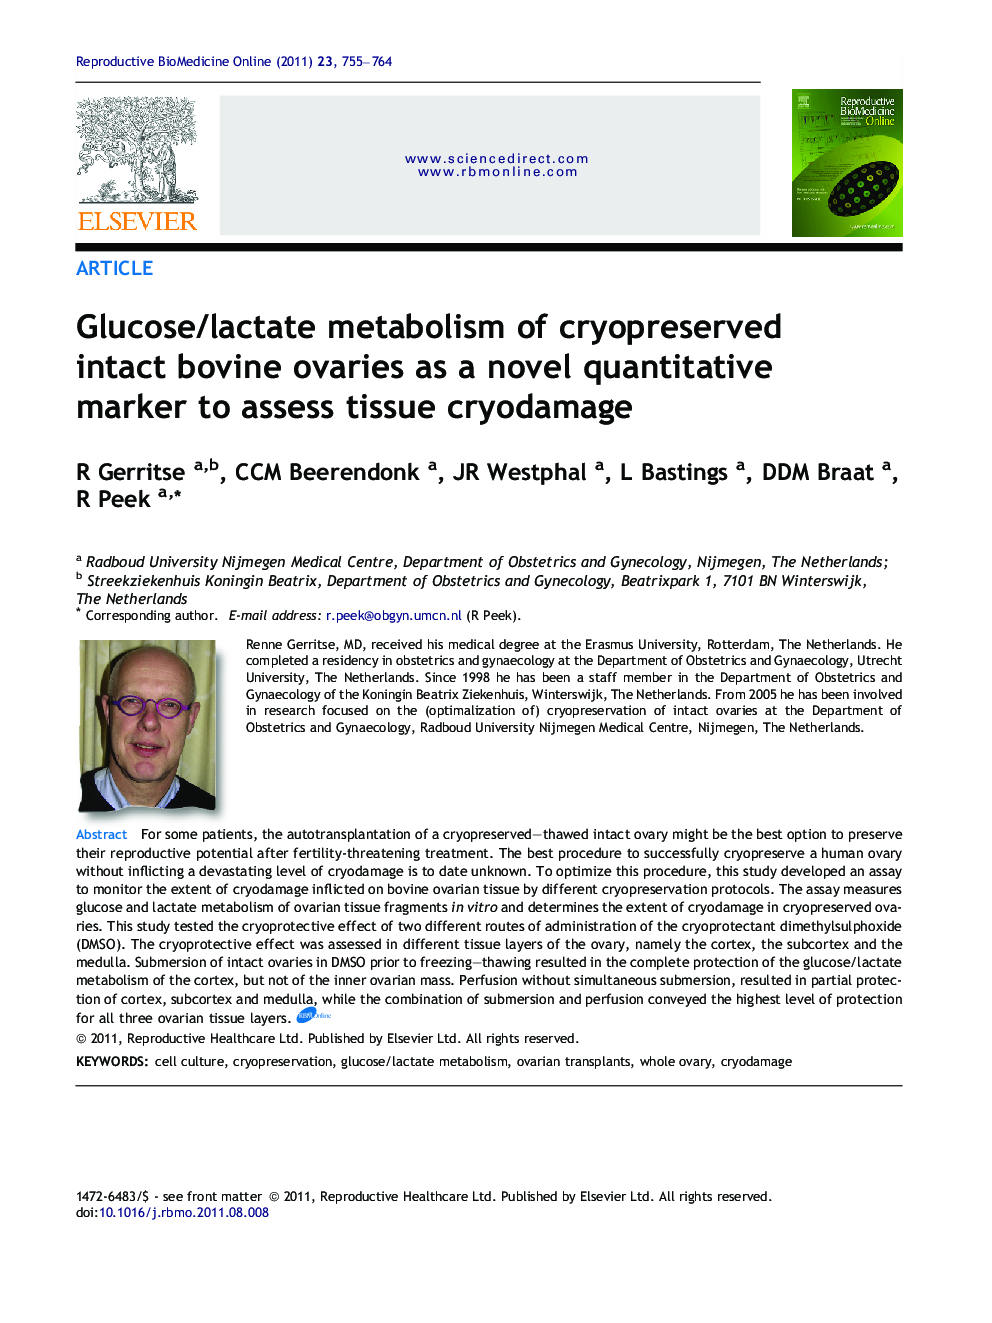 Glucose/lactate metabolism of cryopreserved intact bovine ovaries as a novel quantitative marker to assess tissue cryodamage 